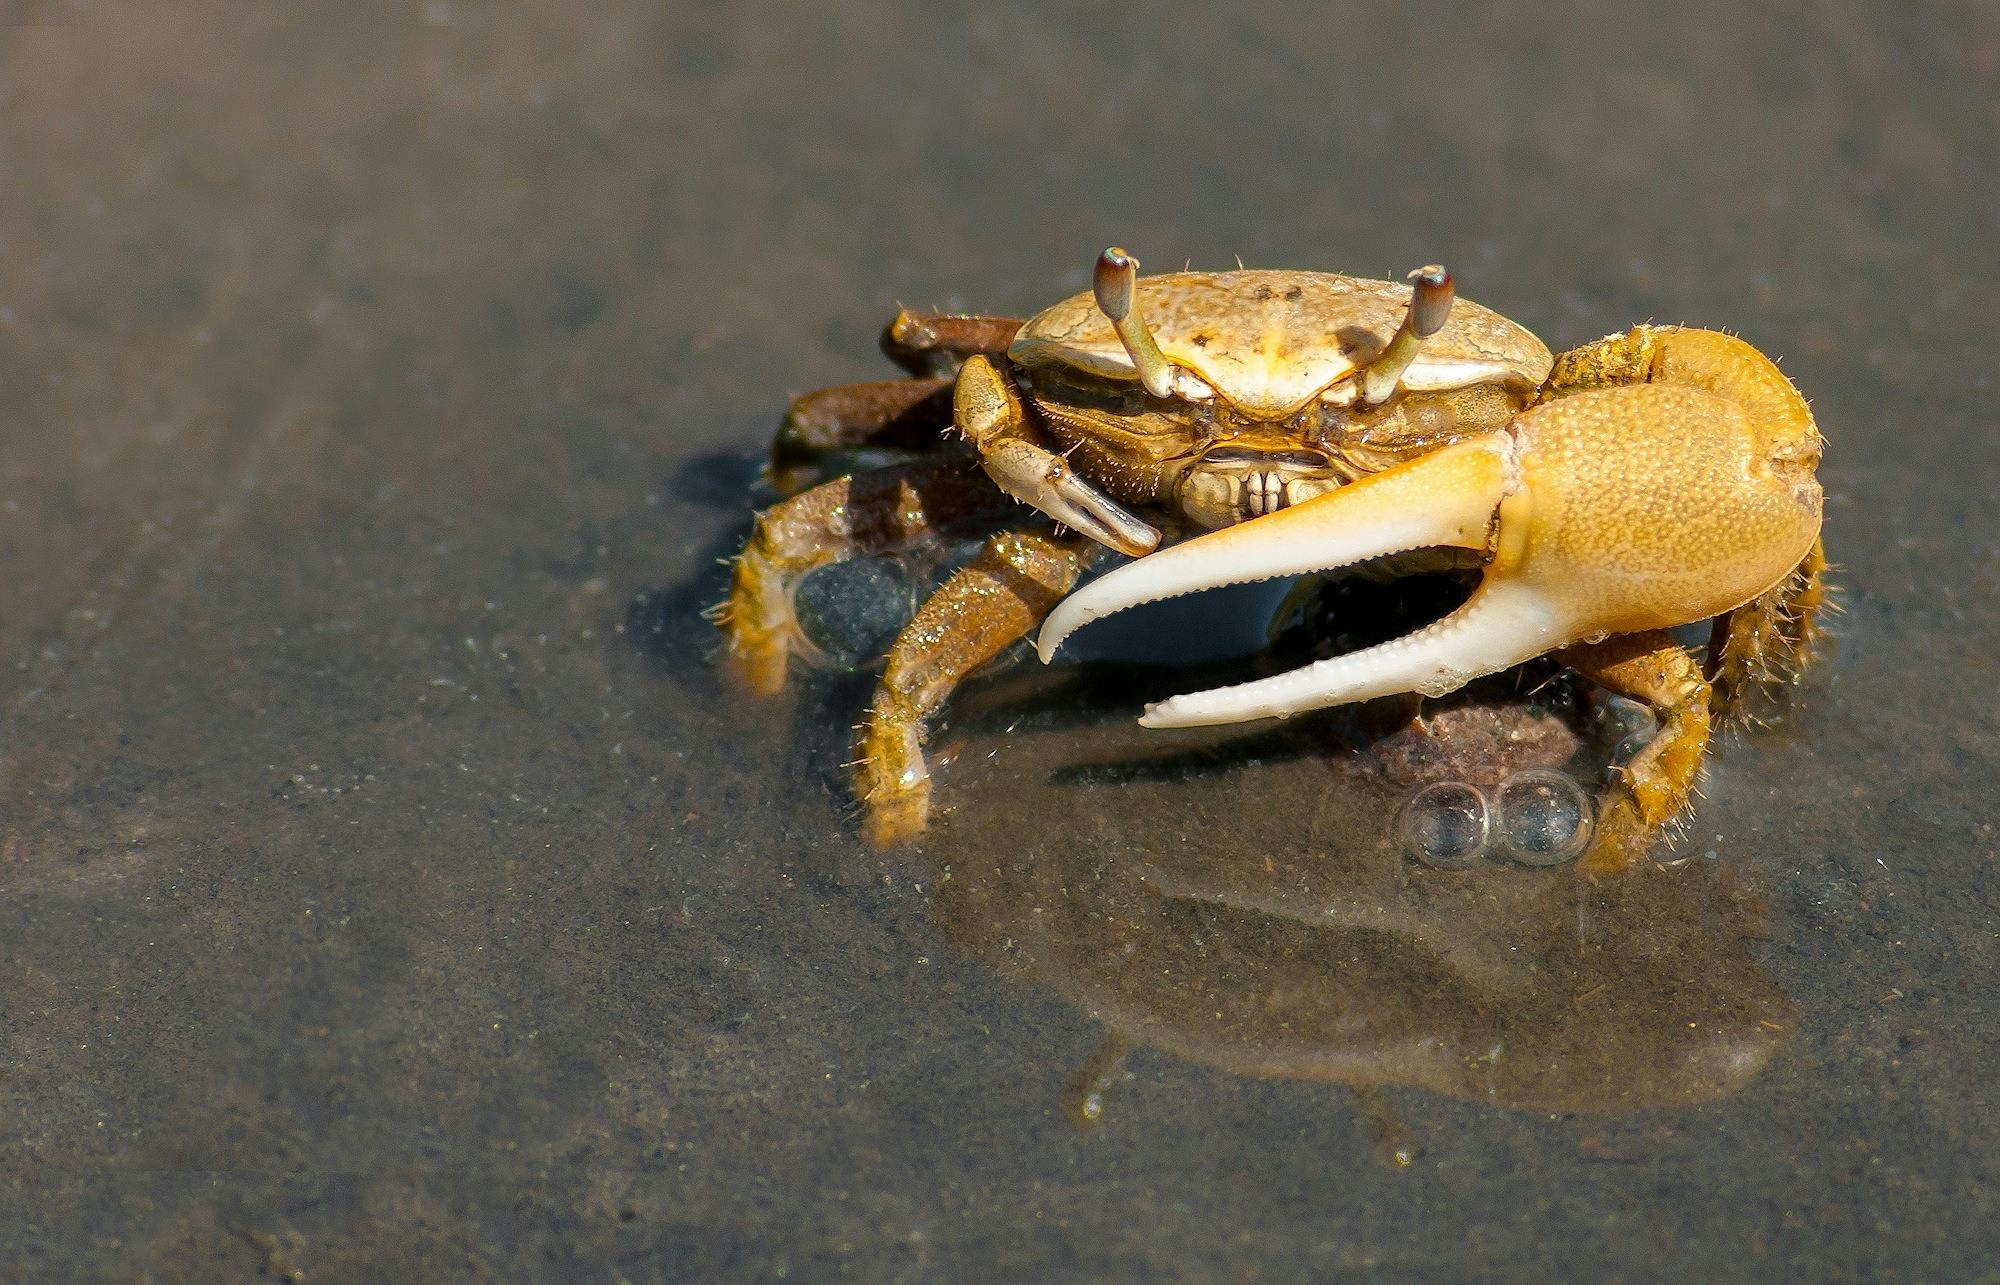 9+ Thousand Crawling Crab Royalty-Free Images, Stock Photos & Pictures